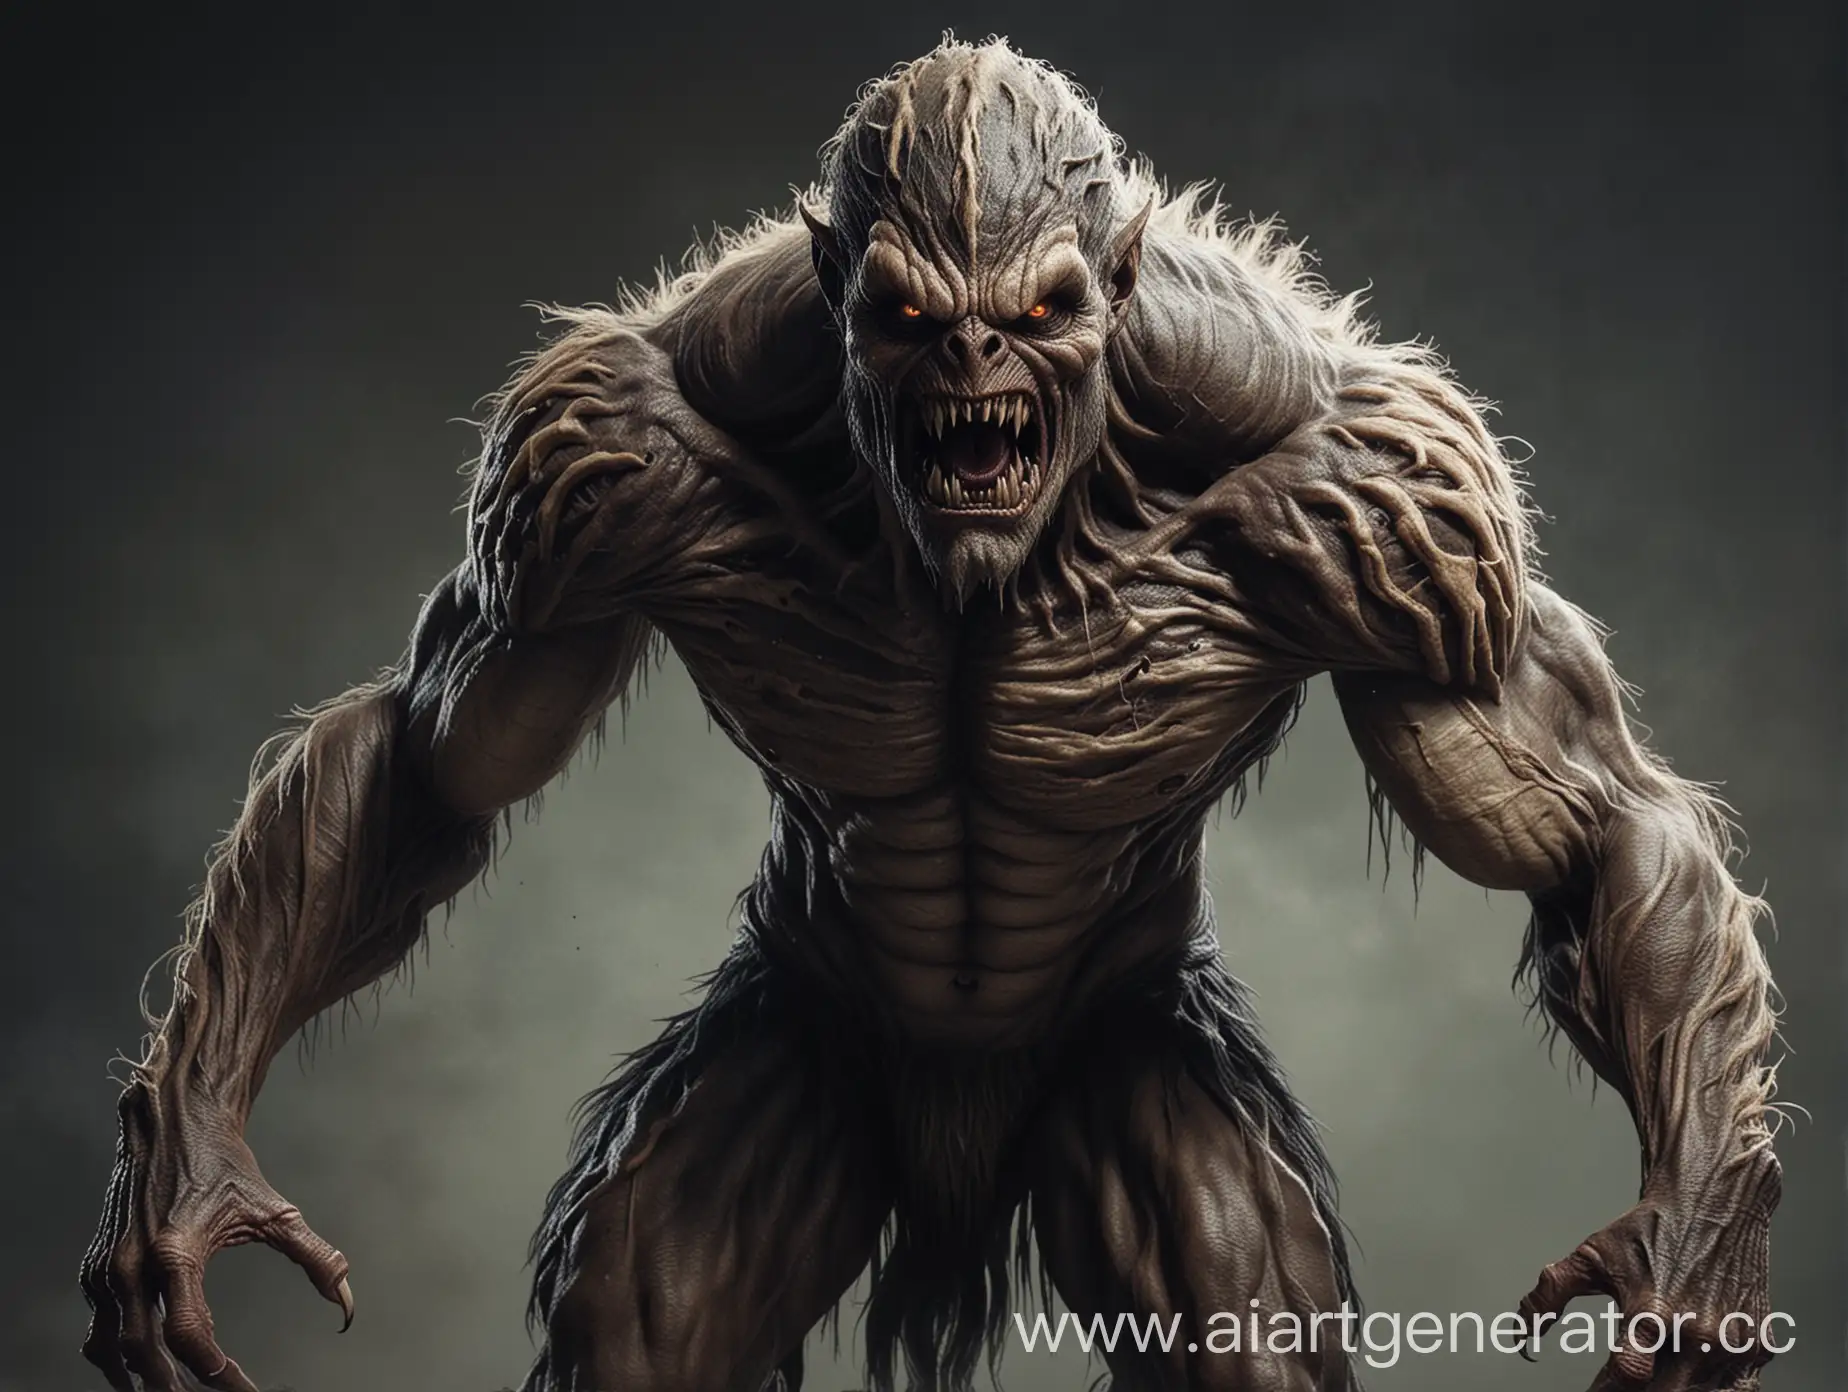 Fearsome-Monster-with-Unearthly-Features